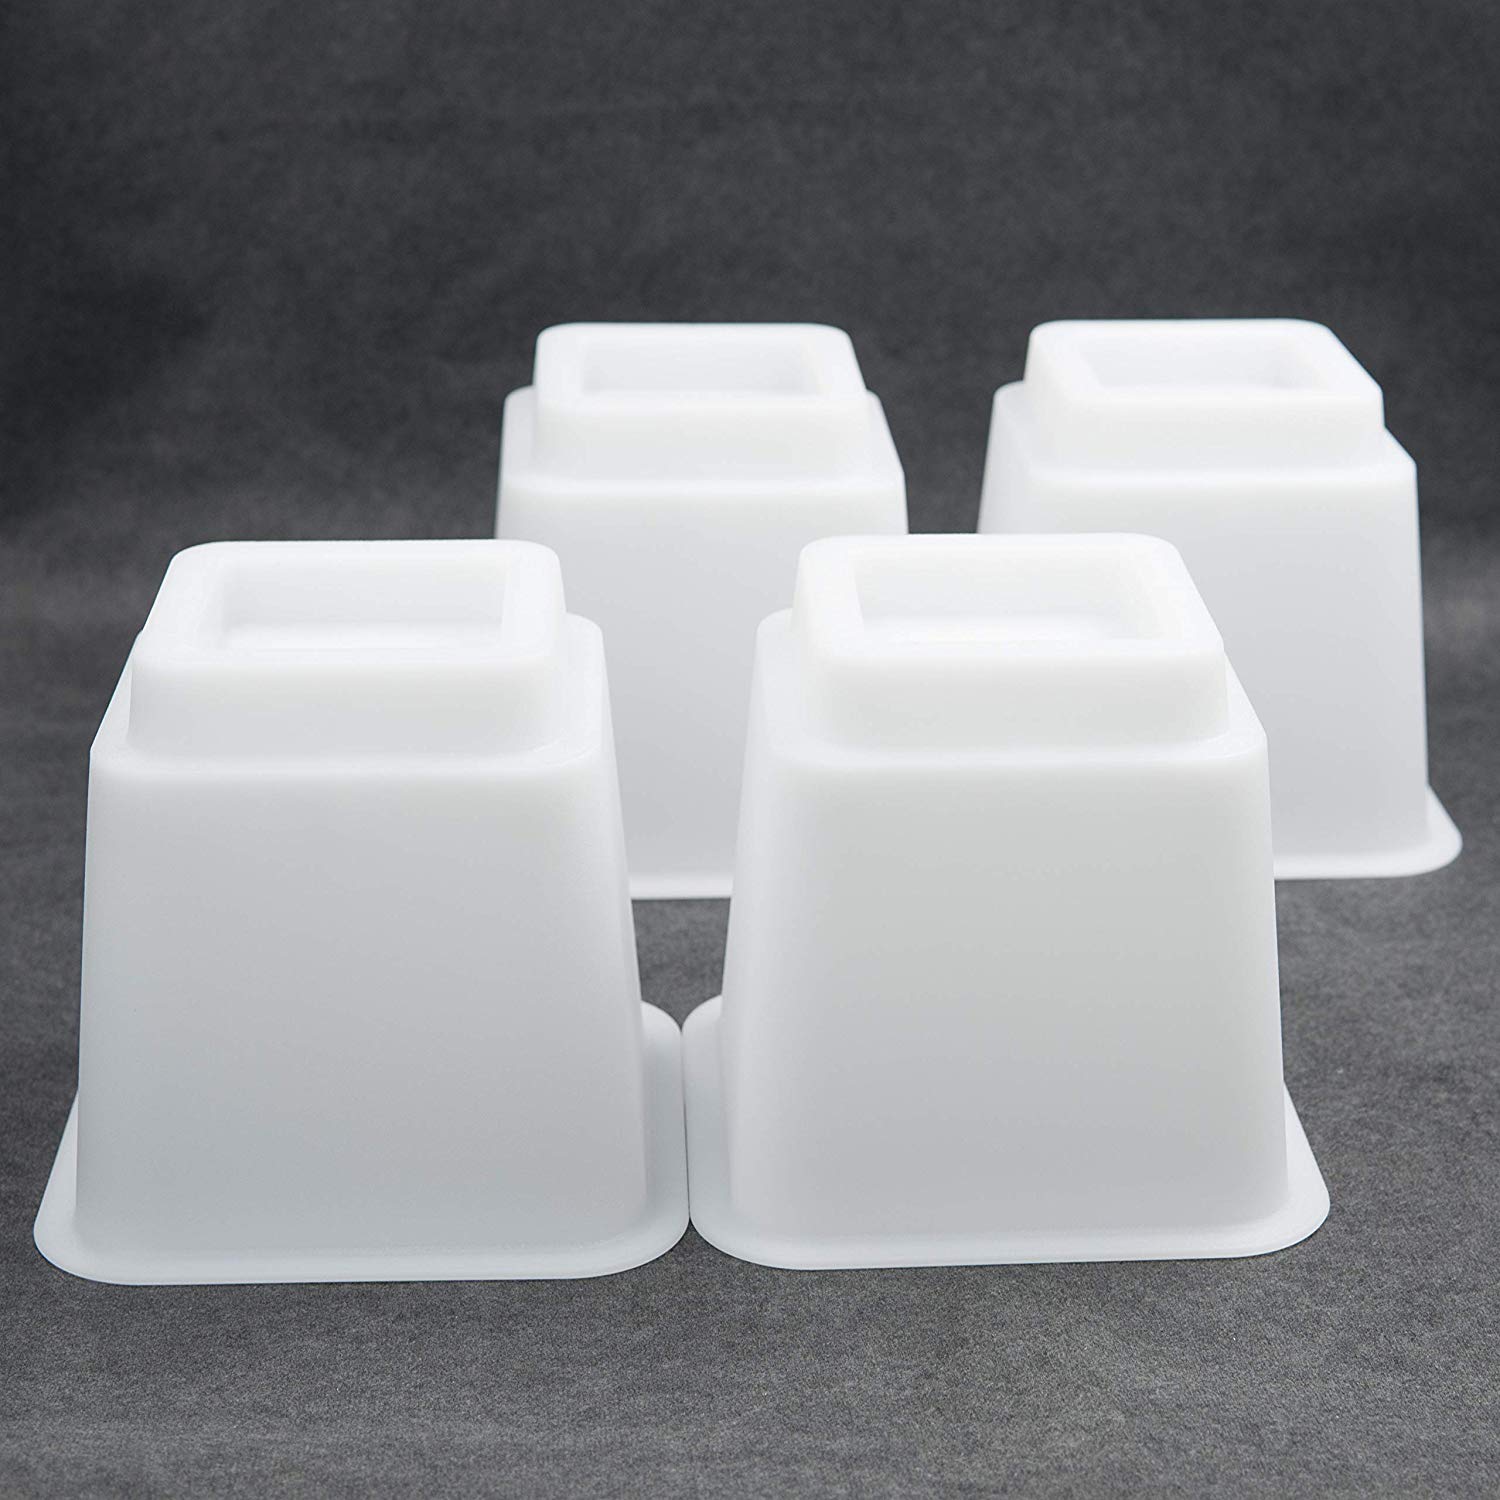 3" 5" or 8" White Adjustable Bed Risers or Furniture Legs Set of 4